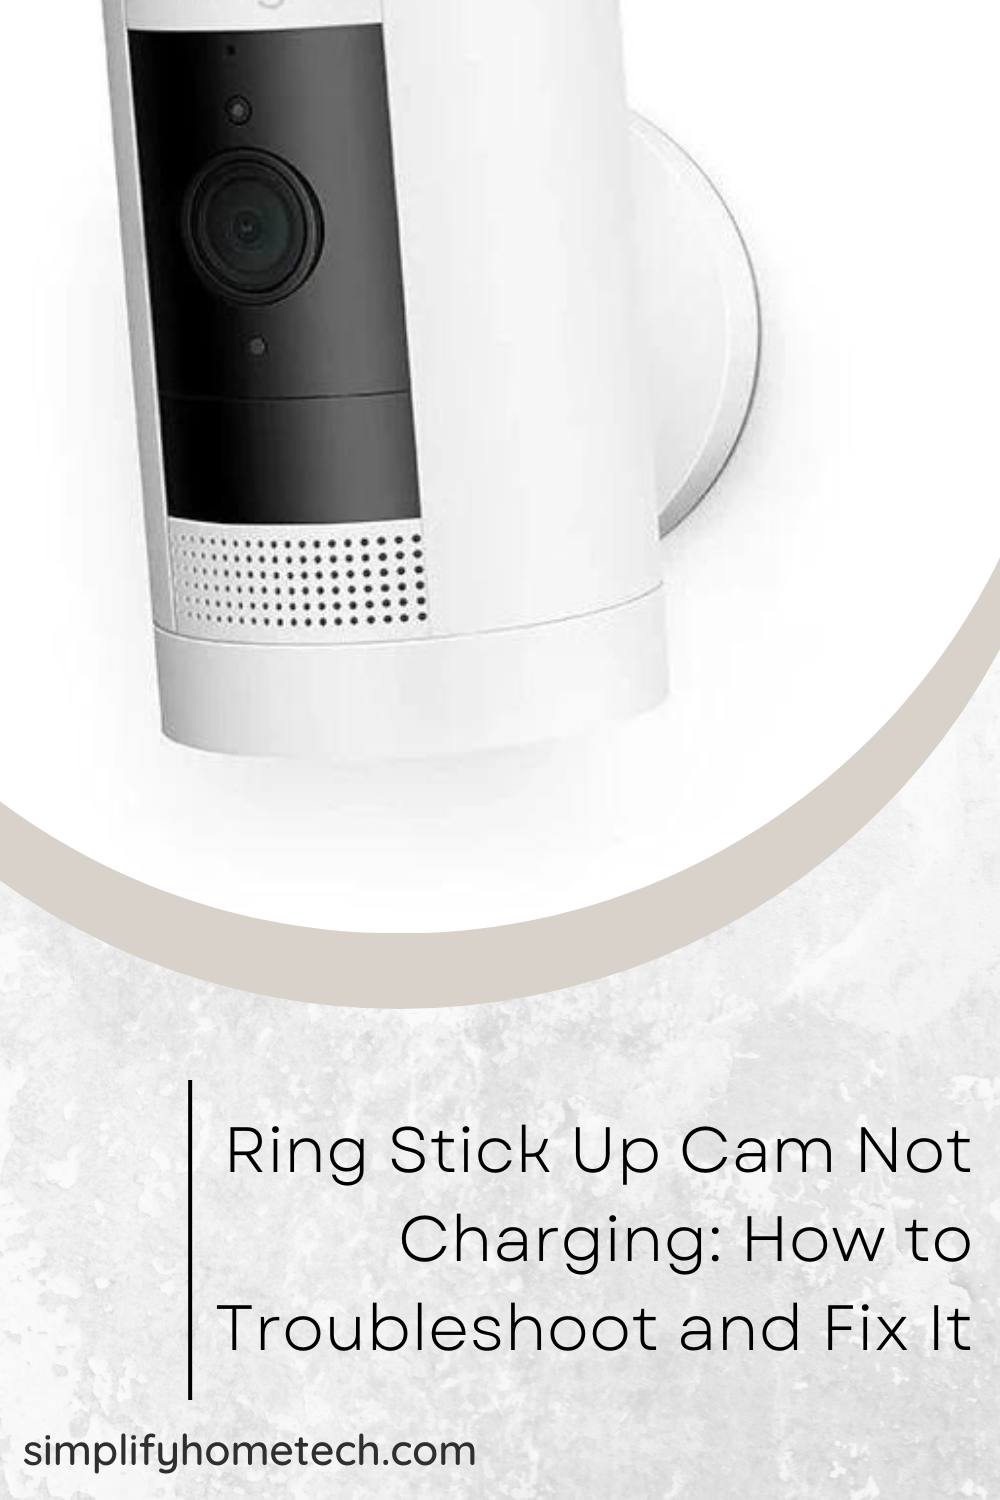 Ring Stick Up Cam Not Charging: How to Troubleshoot and Fix It